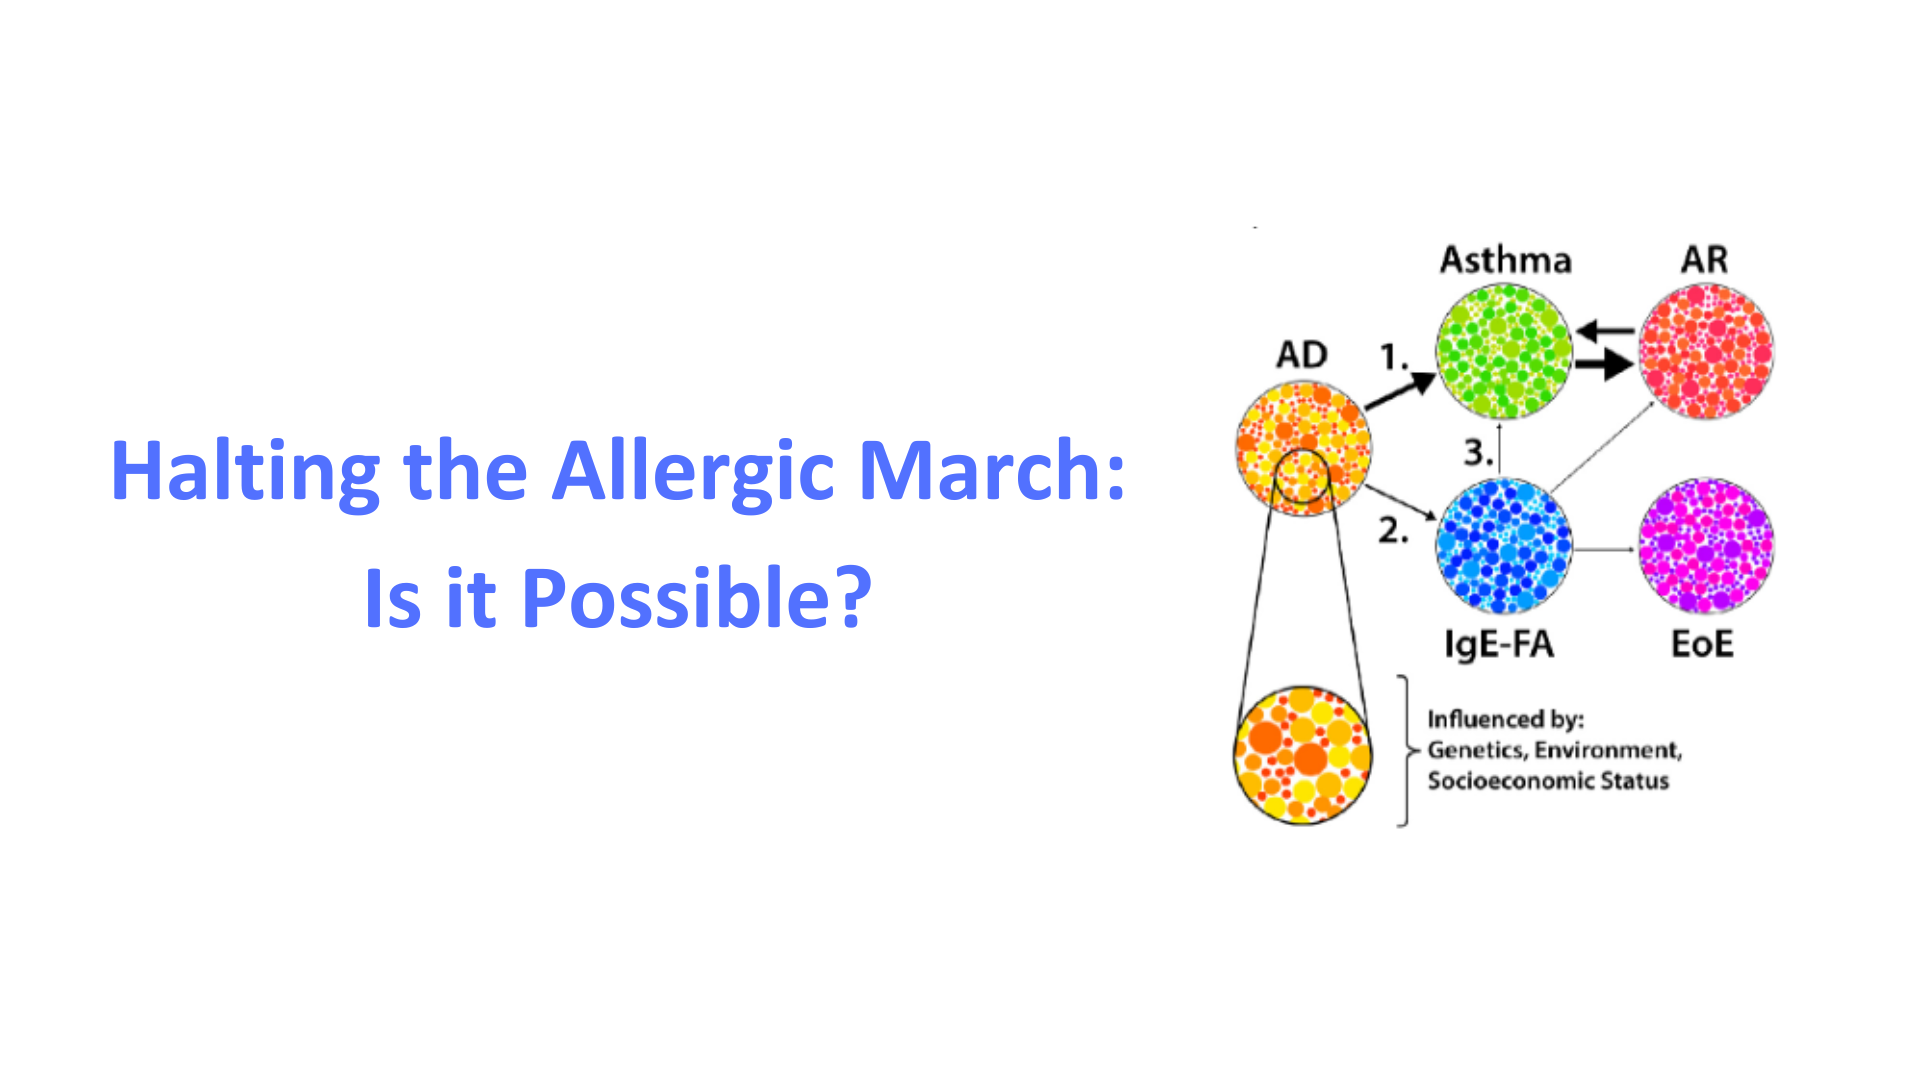 HALTING THE ALLERGIC MARCH: IS IT POSSIBLE?